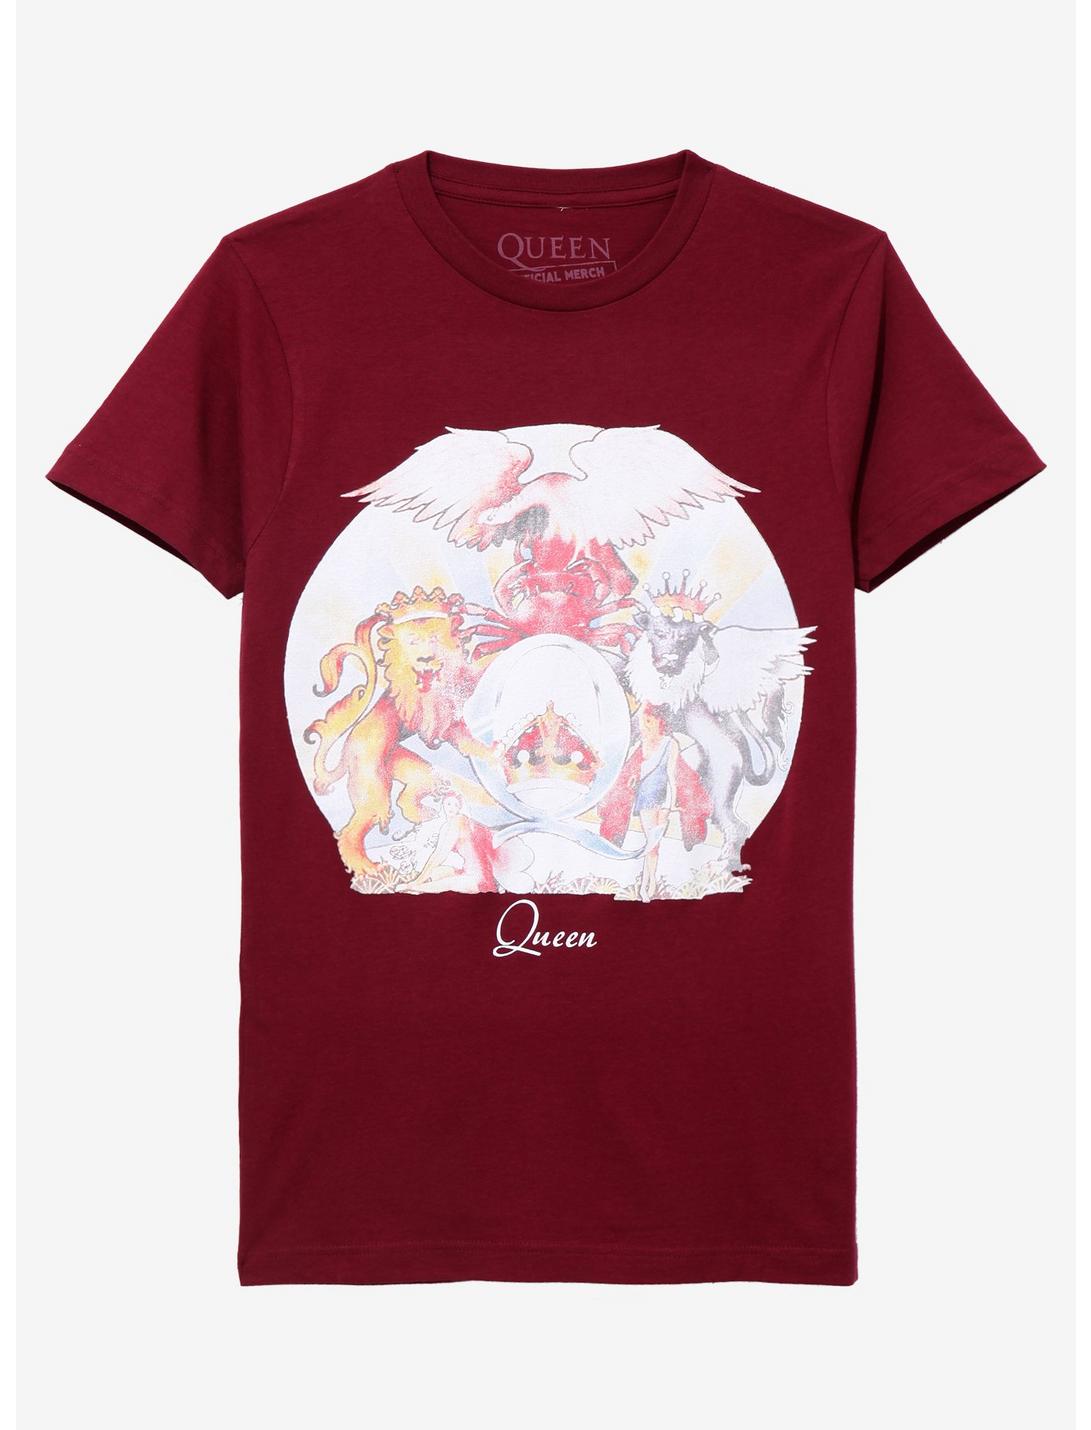 Queen A Day At The Races Album Cover Girls T-Shirt, BURGUNDY, hi-res